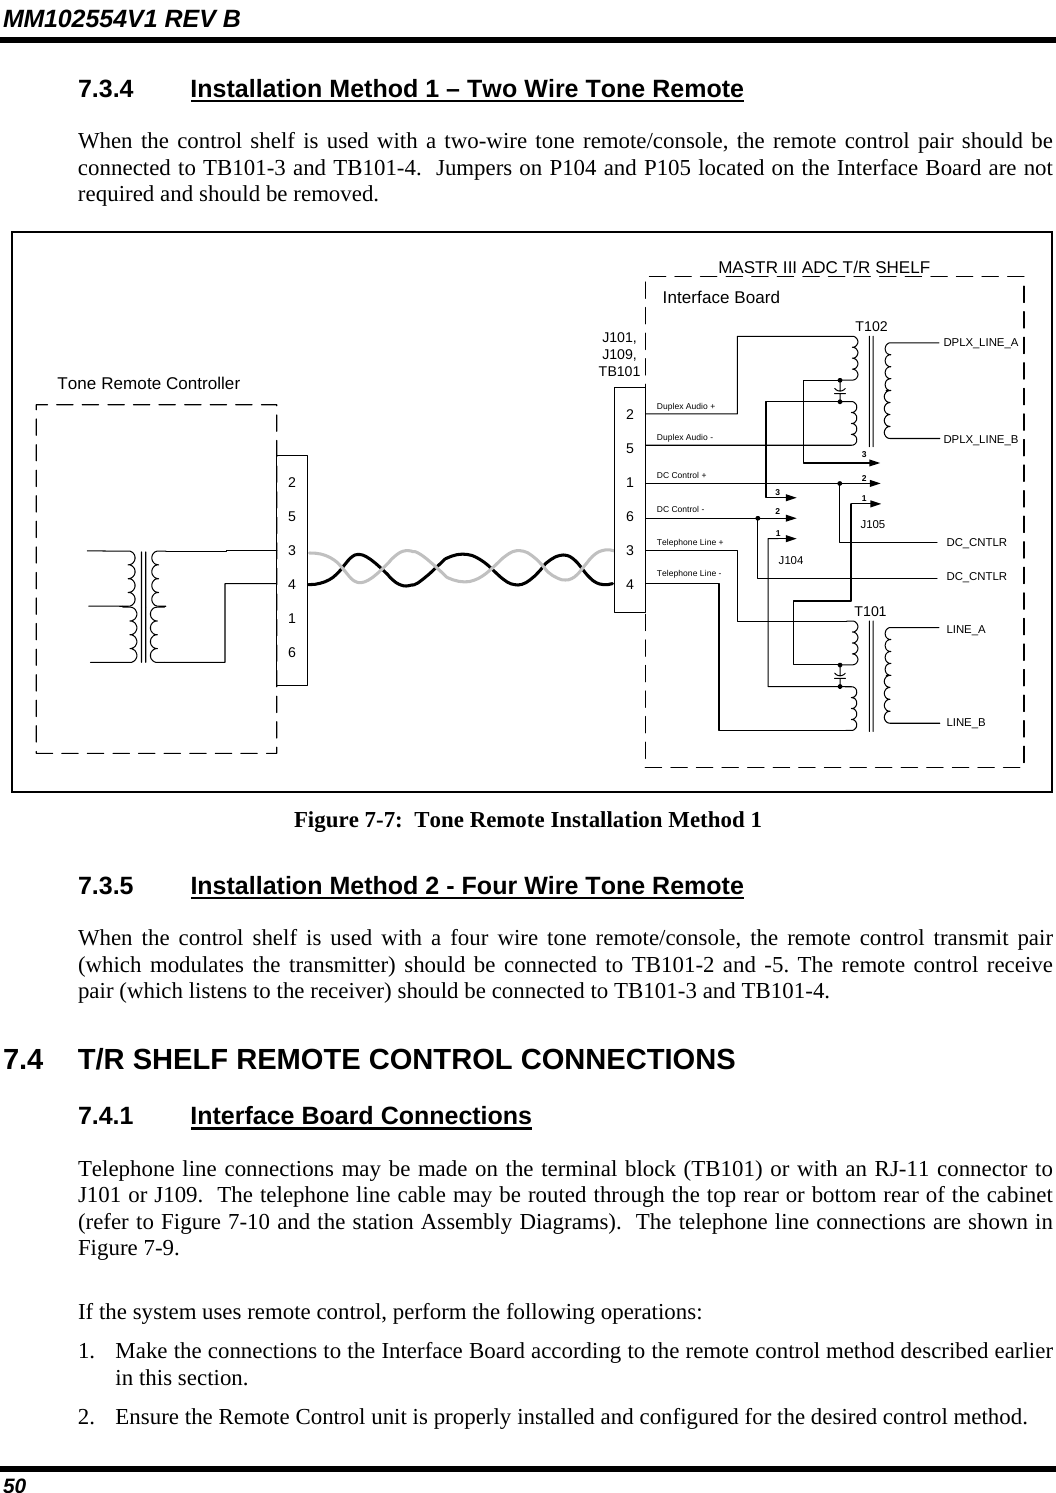 MM102554V1 REV B 50   7.3.4  Installation Method 1 – Two Wire Tone Remote When the control shelf is used with a two-wire tone remote/console, the remote control pair should be connected to TB101-3 and TB101-4.  Jumpers on P104 and P105 located on the Interface Board are not required and should be removed.  J101,J109,TB101253416T101LINE_ALINE_BDC_CNTLRDC_CNTLRTelephone Line +Telephone Line -Tone Remote ControllerMASTR III ADC T/R SHELFInterface BoardDC Control +DC Control -J104123J105123T102DPLX_LINE_ADPLX_LINE_BDuplex Audio +Duplex Audio -251634 Figure 7-7:  Tone Remote Installation Method 1 7.3.5  Installation Method 2 - Four Wire Tone Remote When the control shelf is used with a four wire tone remote/console, the remote control transmit pair (which modulates the transmitter) should be connected to TB101-2 and -5. The remote control receive pair (which listens to the receiver) should be connected to TB101-3 and TB101-4.  7.4  T/R SHELF REMOTE CONTROL CONNECTIONS 7.4.1  Interface Board Connections Telephone line connections may be made on the terminal block (TB101) or with an RJ-11 connector to J101 or J109.  The telephone line cable may be routed through the top rear or bottom rear of the cabinet (refer to Figure 7-10 and the station Assembly Diagrams).  The telephone line connections are shown in Figure 7-9. If the system uses remote control, perform the following operations: 1. Make the connections to the Interface Board according to the remote control method described earlier in this section.   2. Ensure the Remote Control unit is properly installed and configured for the desired control method. 